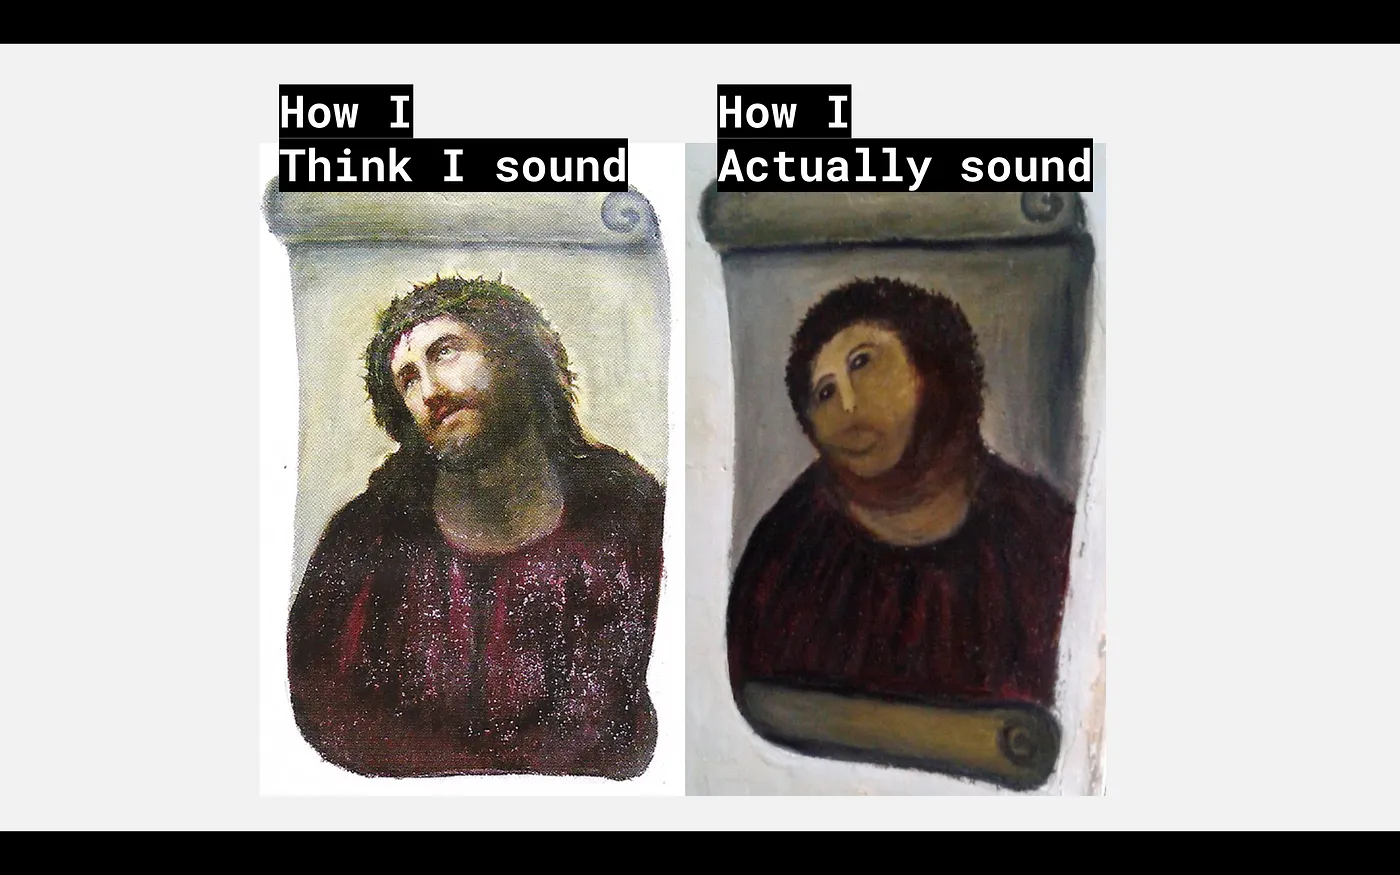 A meme showing the difference between how someone thinks they sound vs how they actually sound.